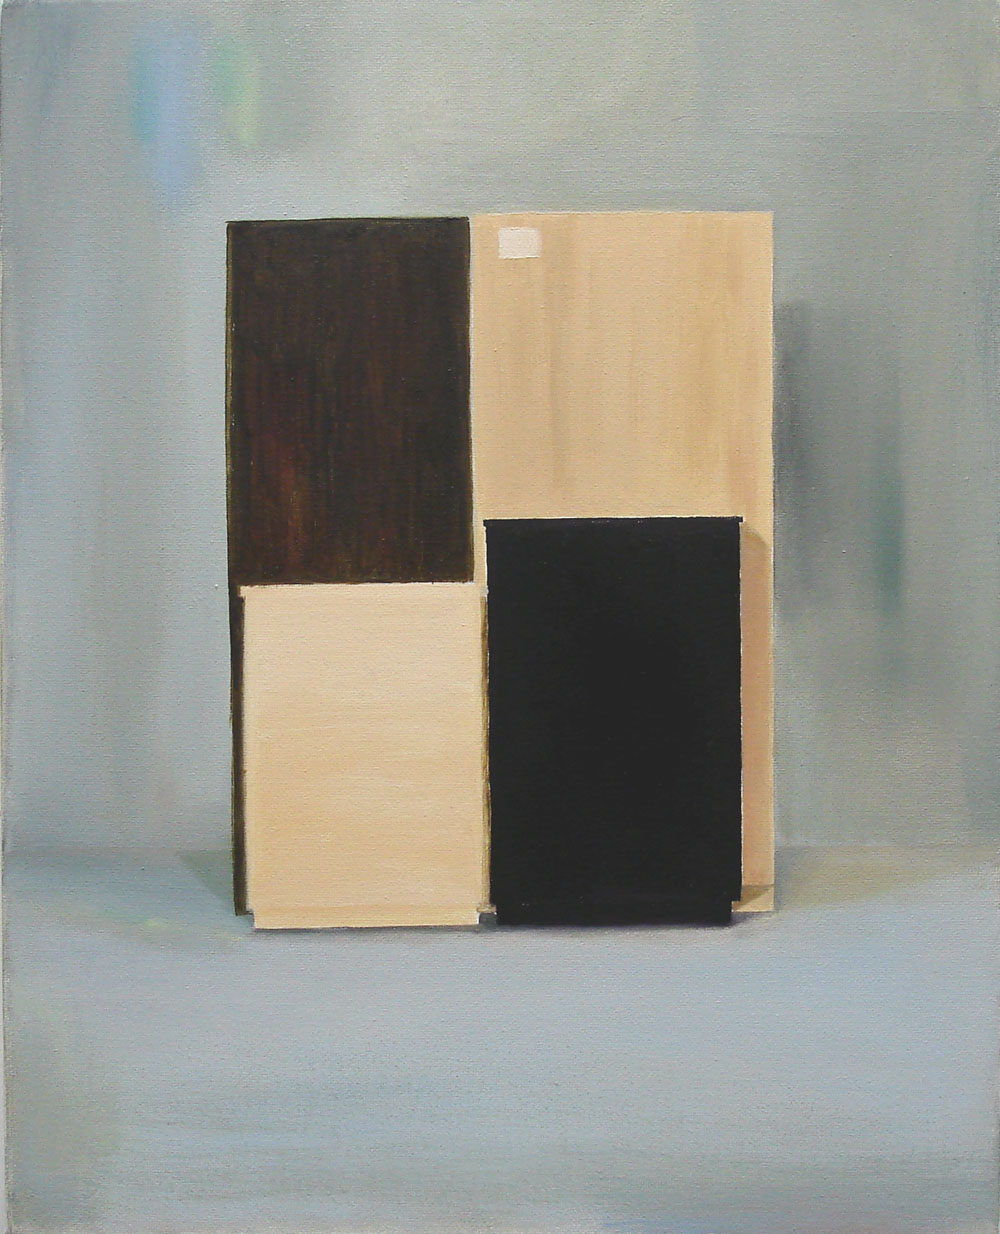   Furniture    2010, oil on canvas, 30 x 24cm     